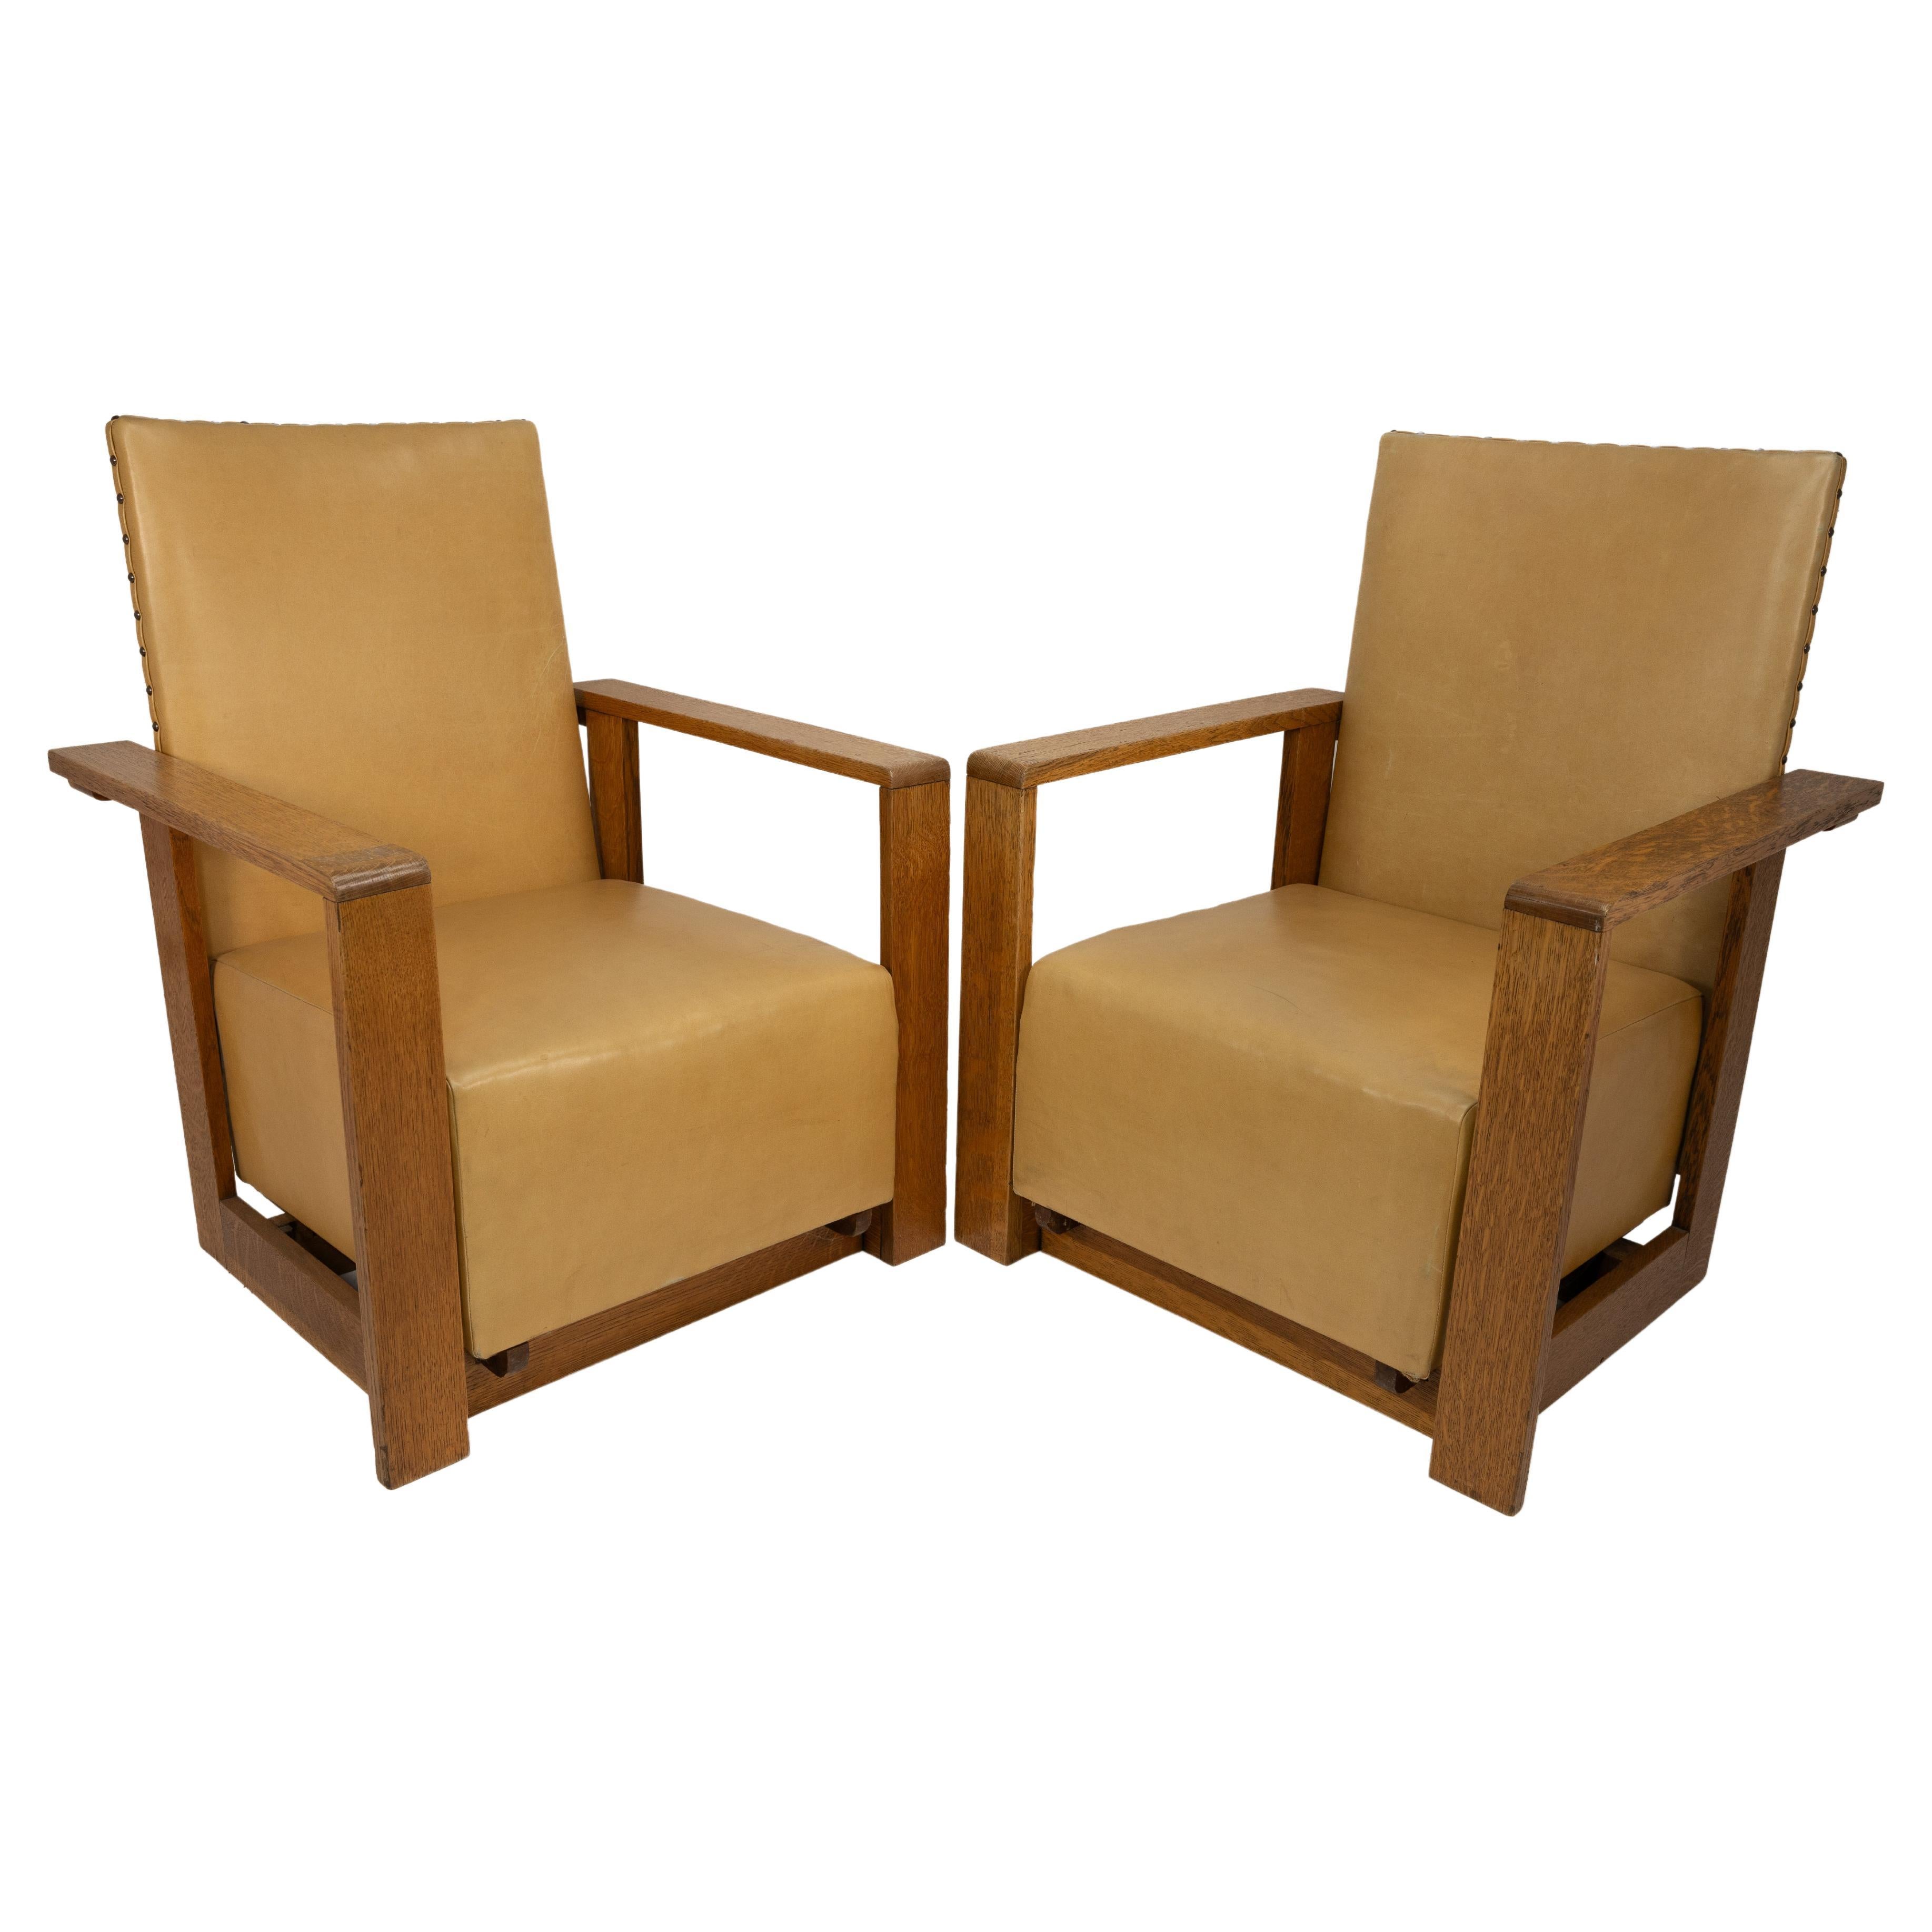 Gordon Russell, W. H. Russell. A pair of Arts & Crafts oak reclining armchairs For Sale